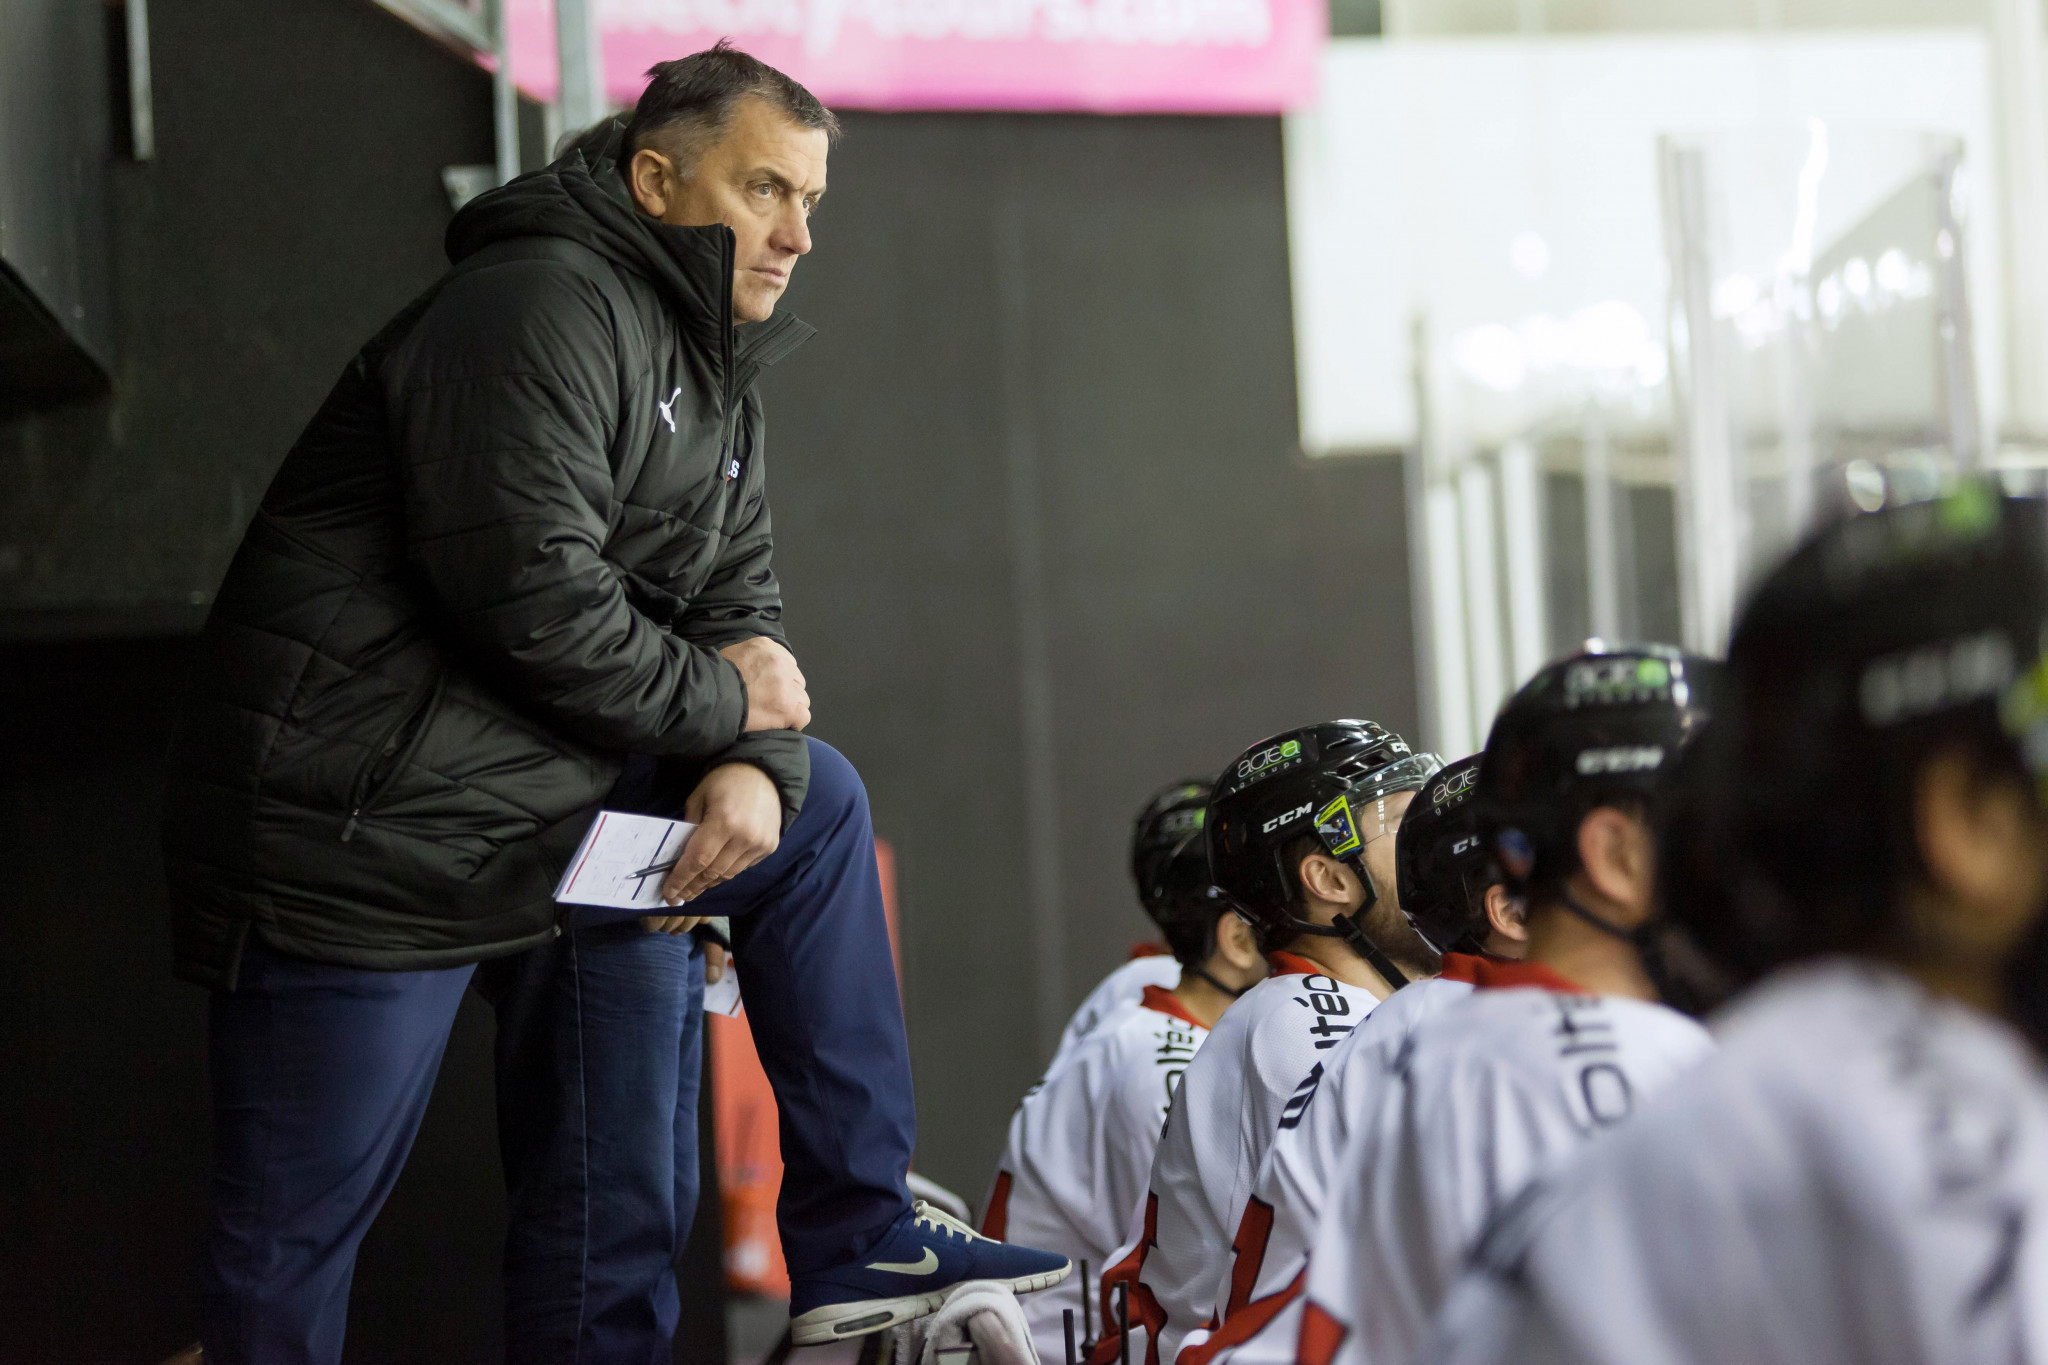 Bozon to continue as France ice hockey coach into Milan Cortina 2026 qualifying